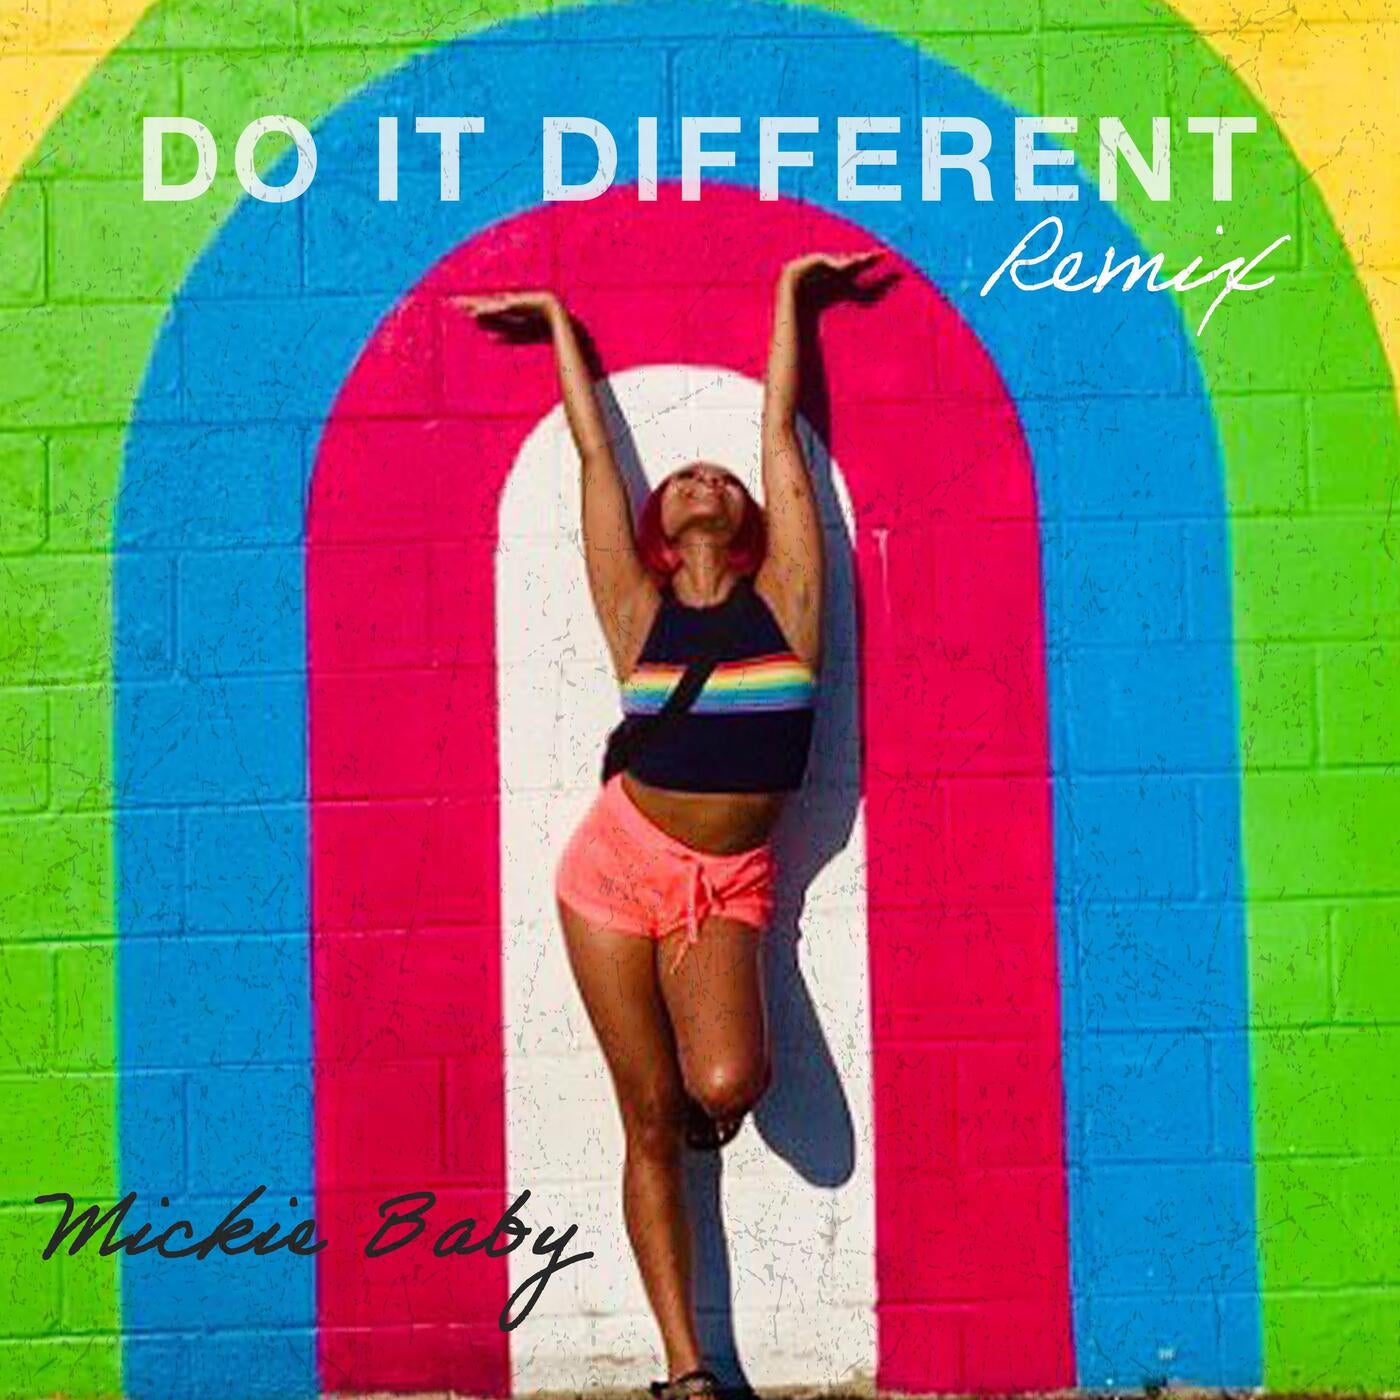 DO IT DIFFERENT (feat. RAY ISAAC) [Remix]